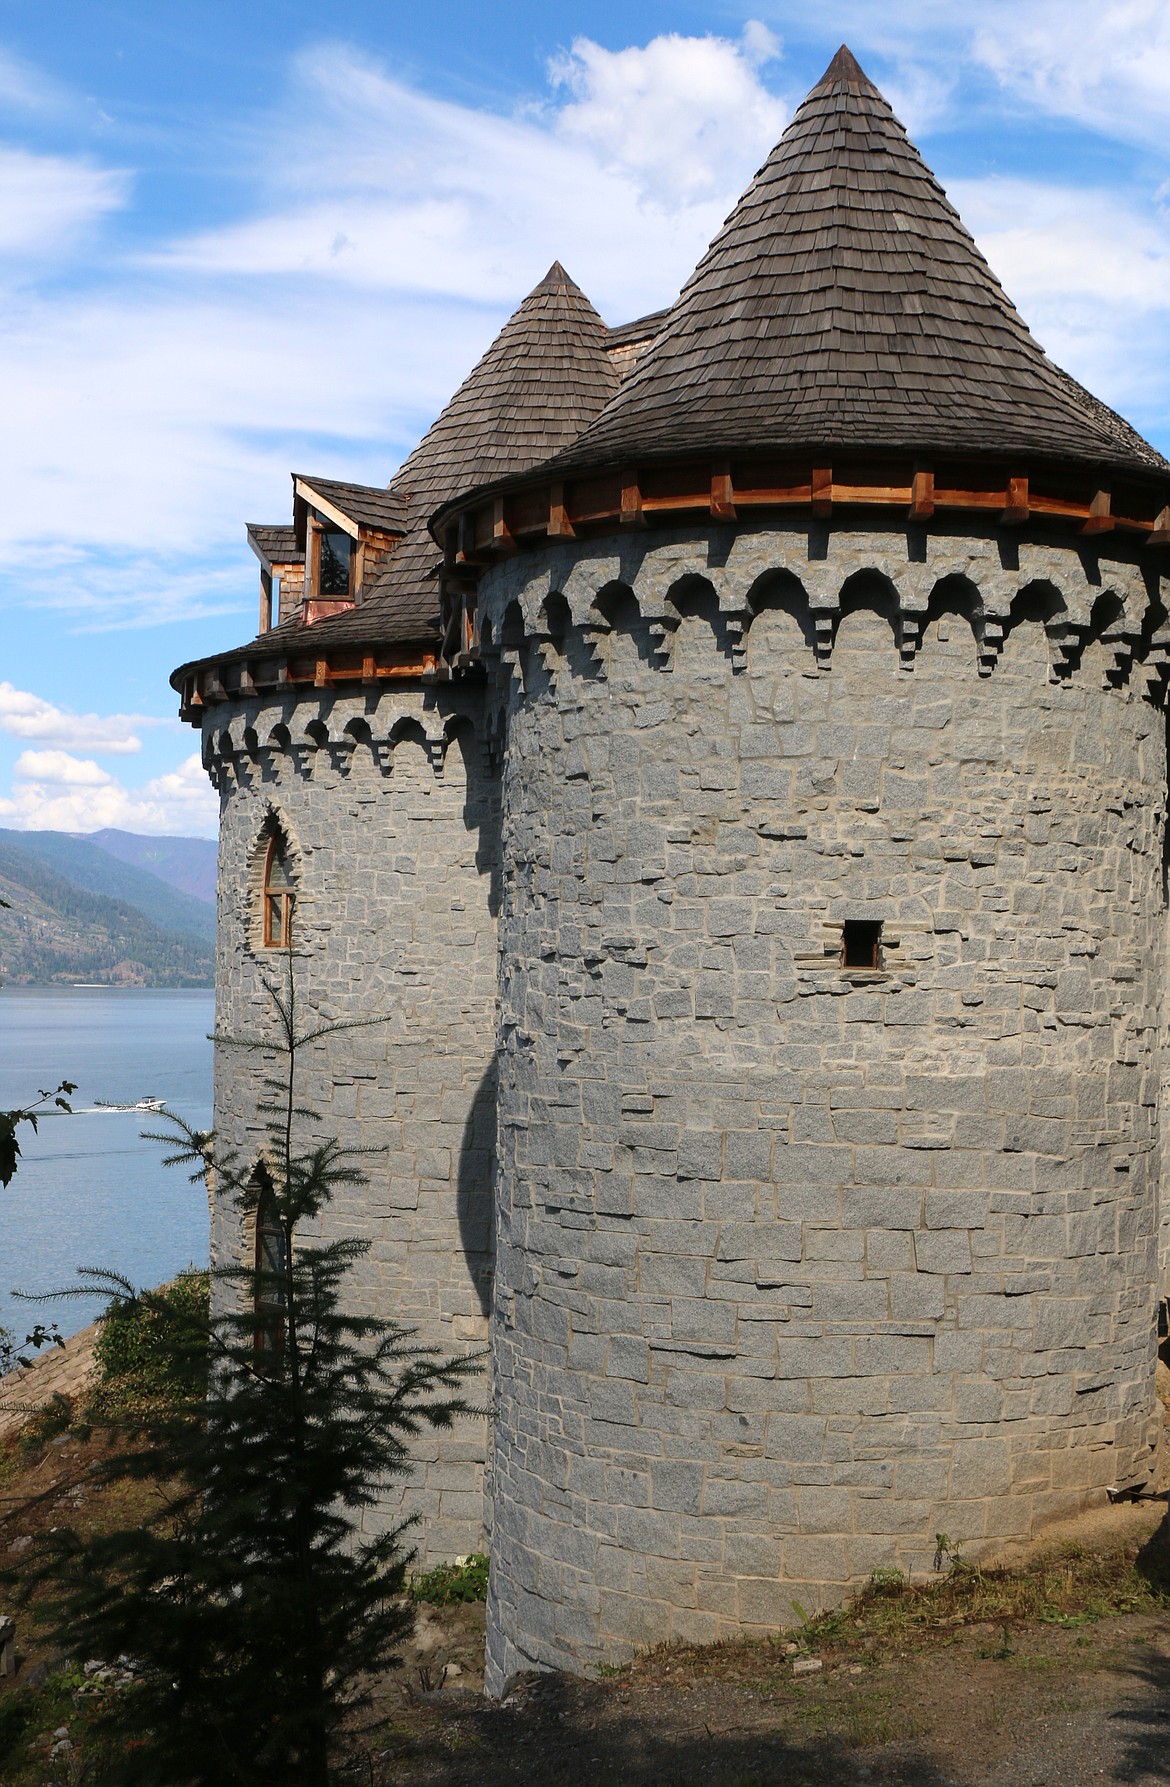 Lake Pend Oreille can be seen in the background as Castle Von Frandsen sits perched on a 70-foot cliff in the Bottle Bay area.